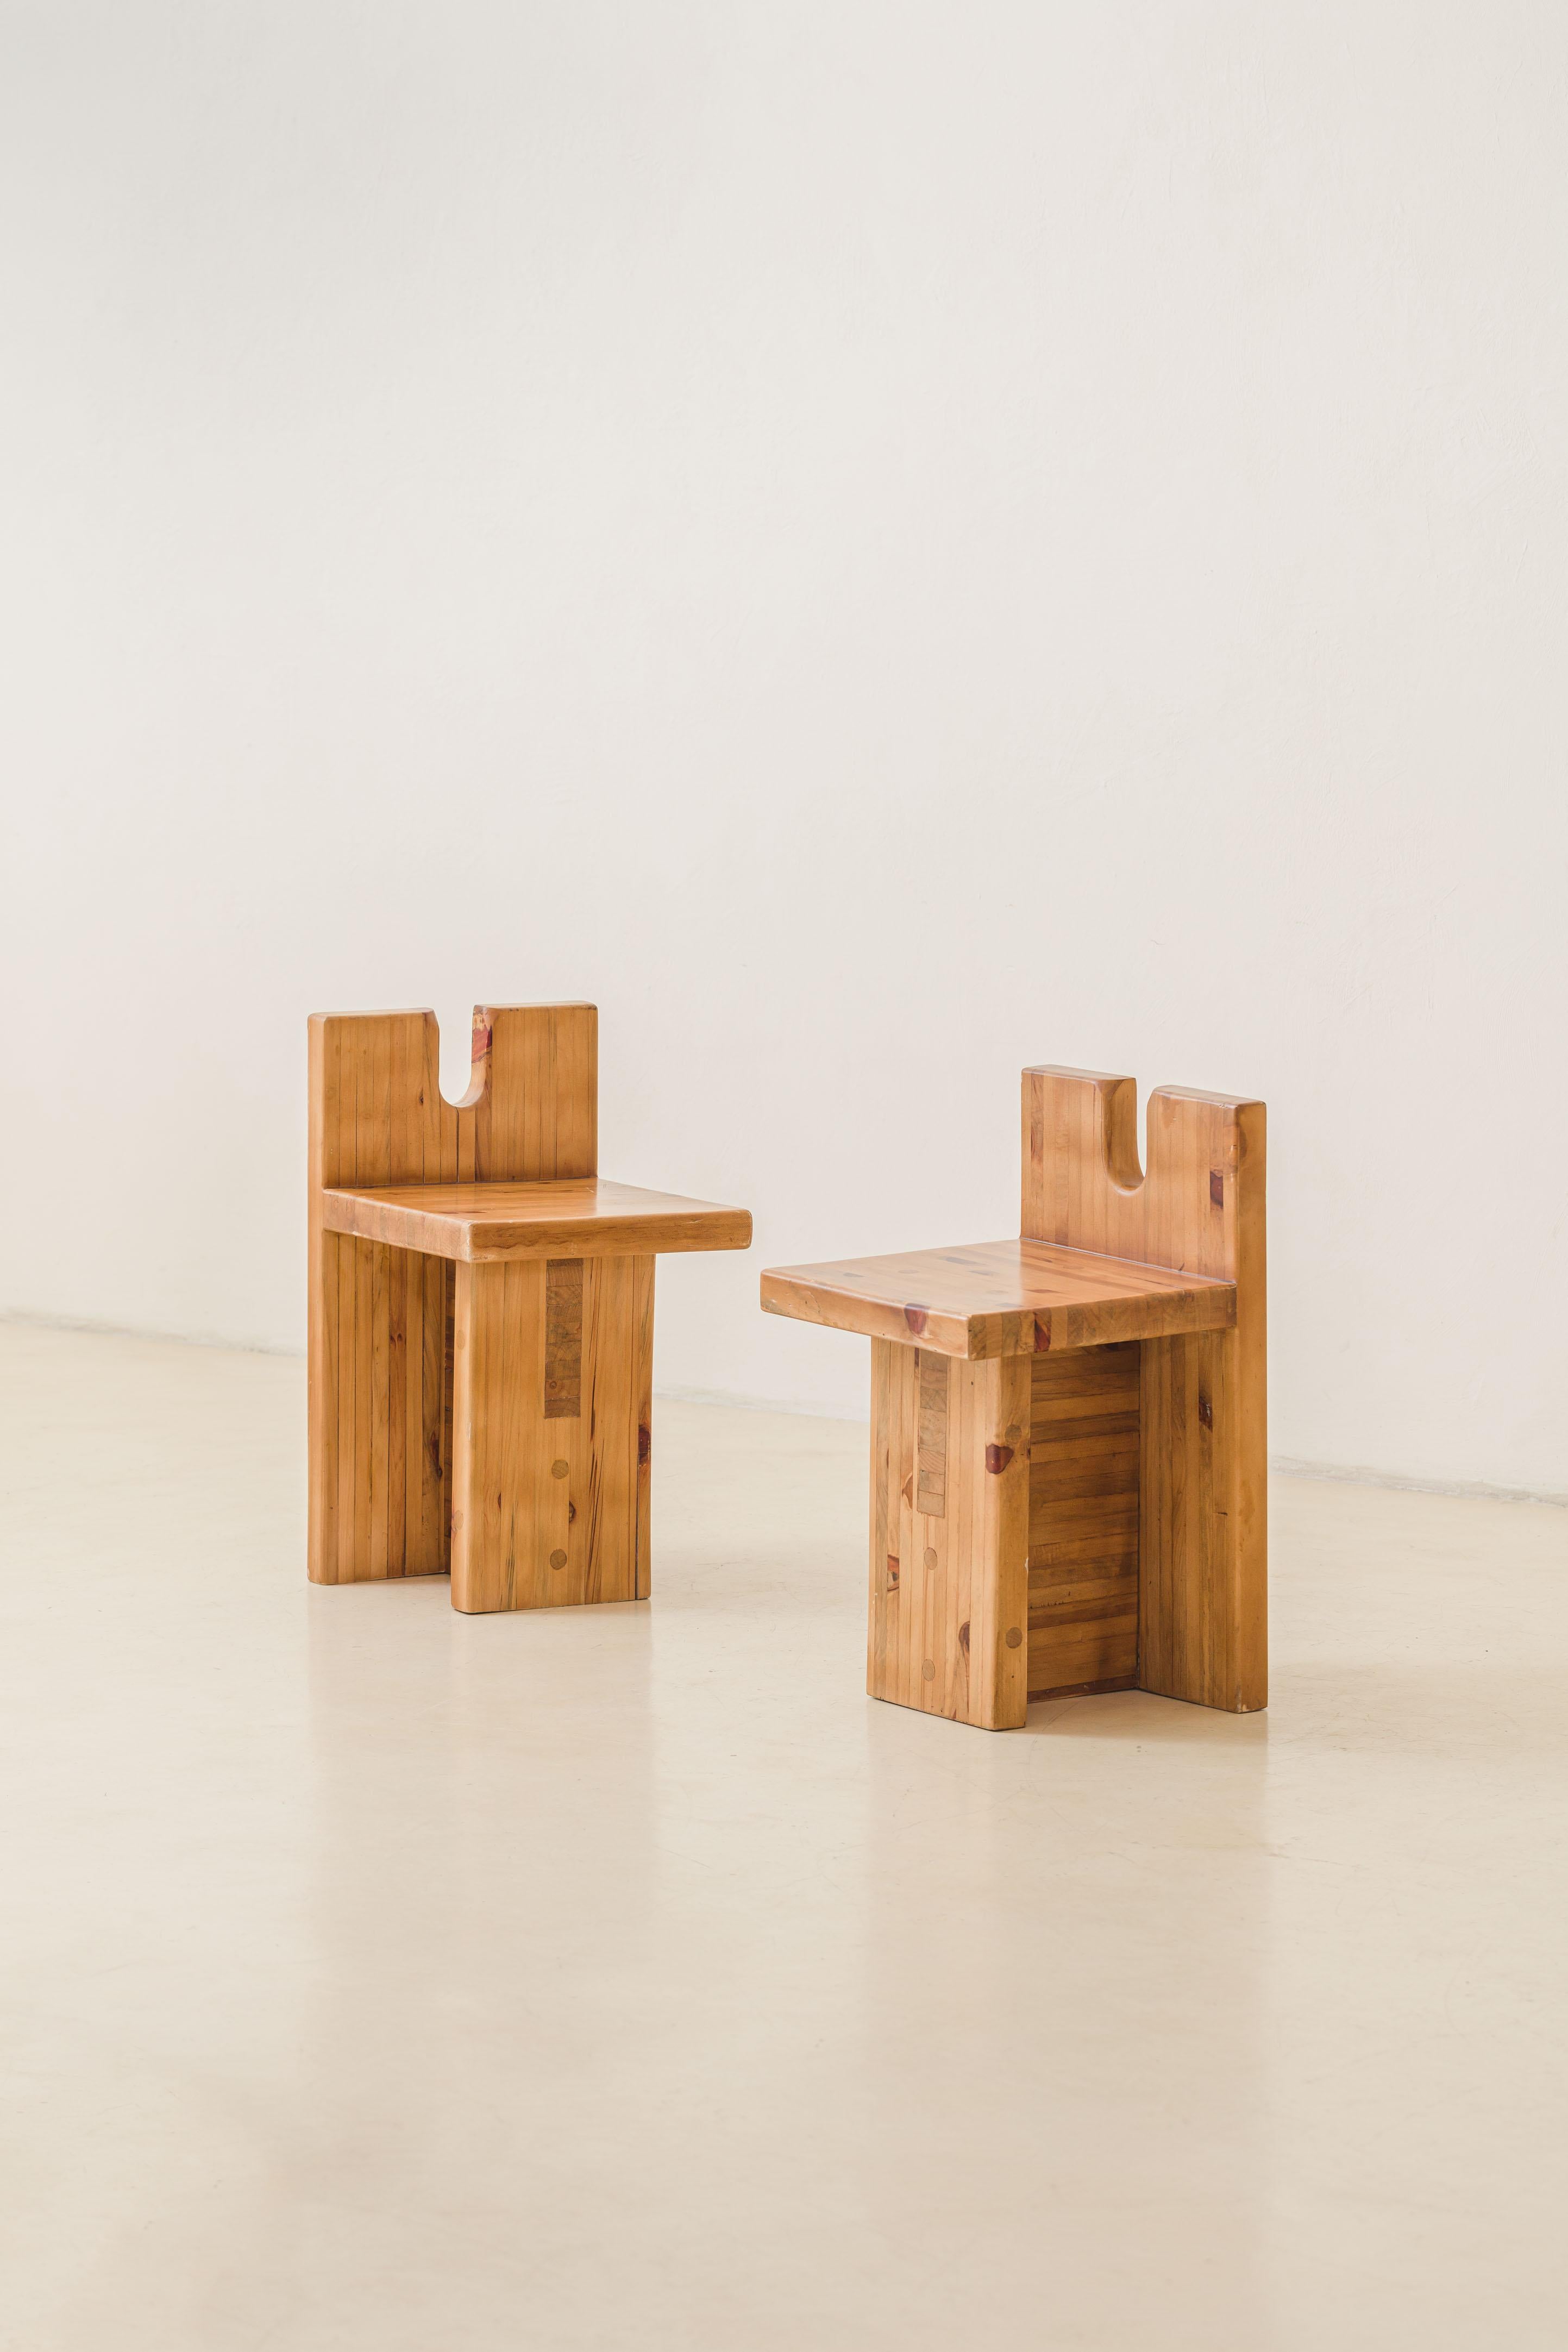 This iconic stool was designed by Lina Bo Bardi (1914-1992) and made especially for Sesc Pompeia, a cultural center in São Paulo, Brazil. It consists of structures that resemble crates made of pine wood.

Lina’s attempt to make furniture of good